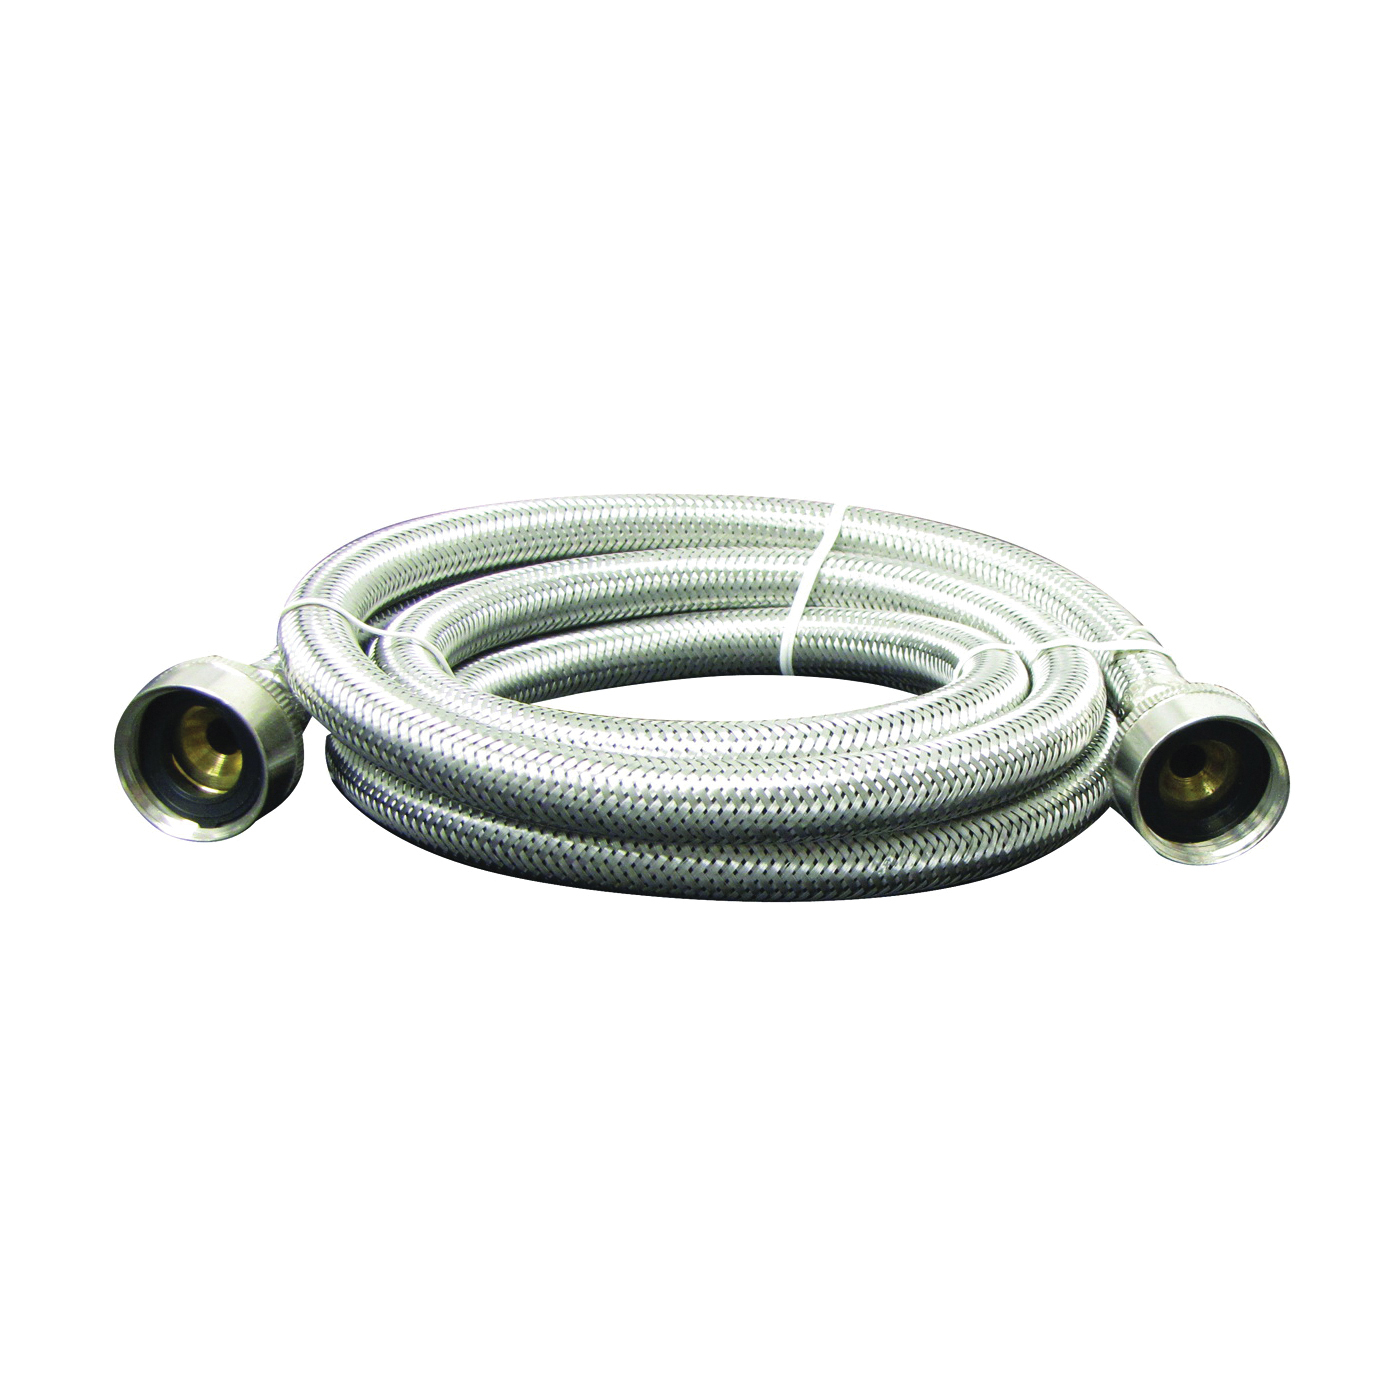 PP22816 Washing Machine Discharge Hose, 3/4 in ID, 6 ft L, FGH x FGH, Stainless Steel